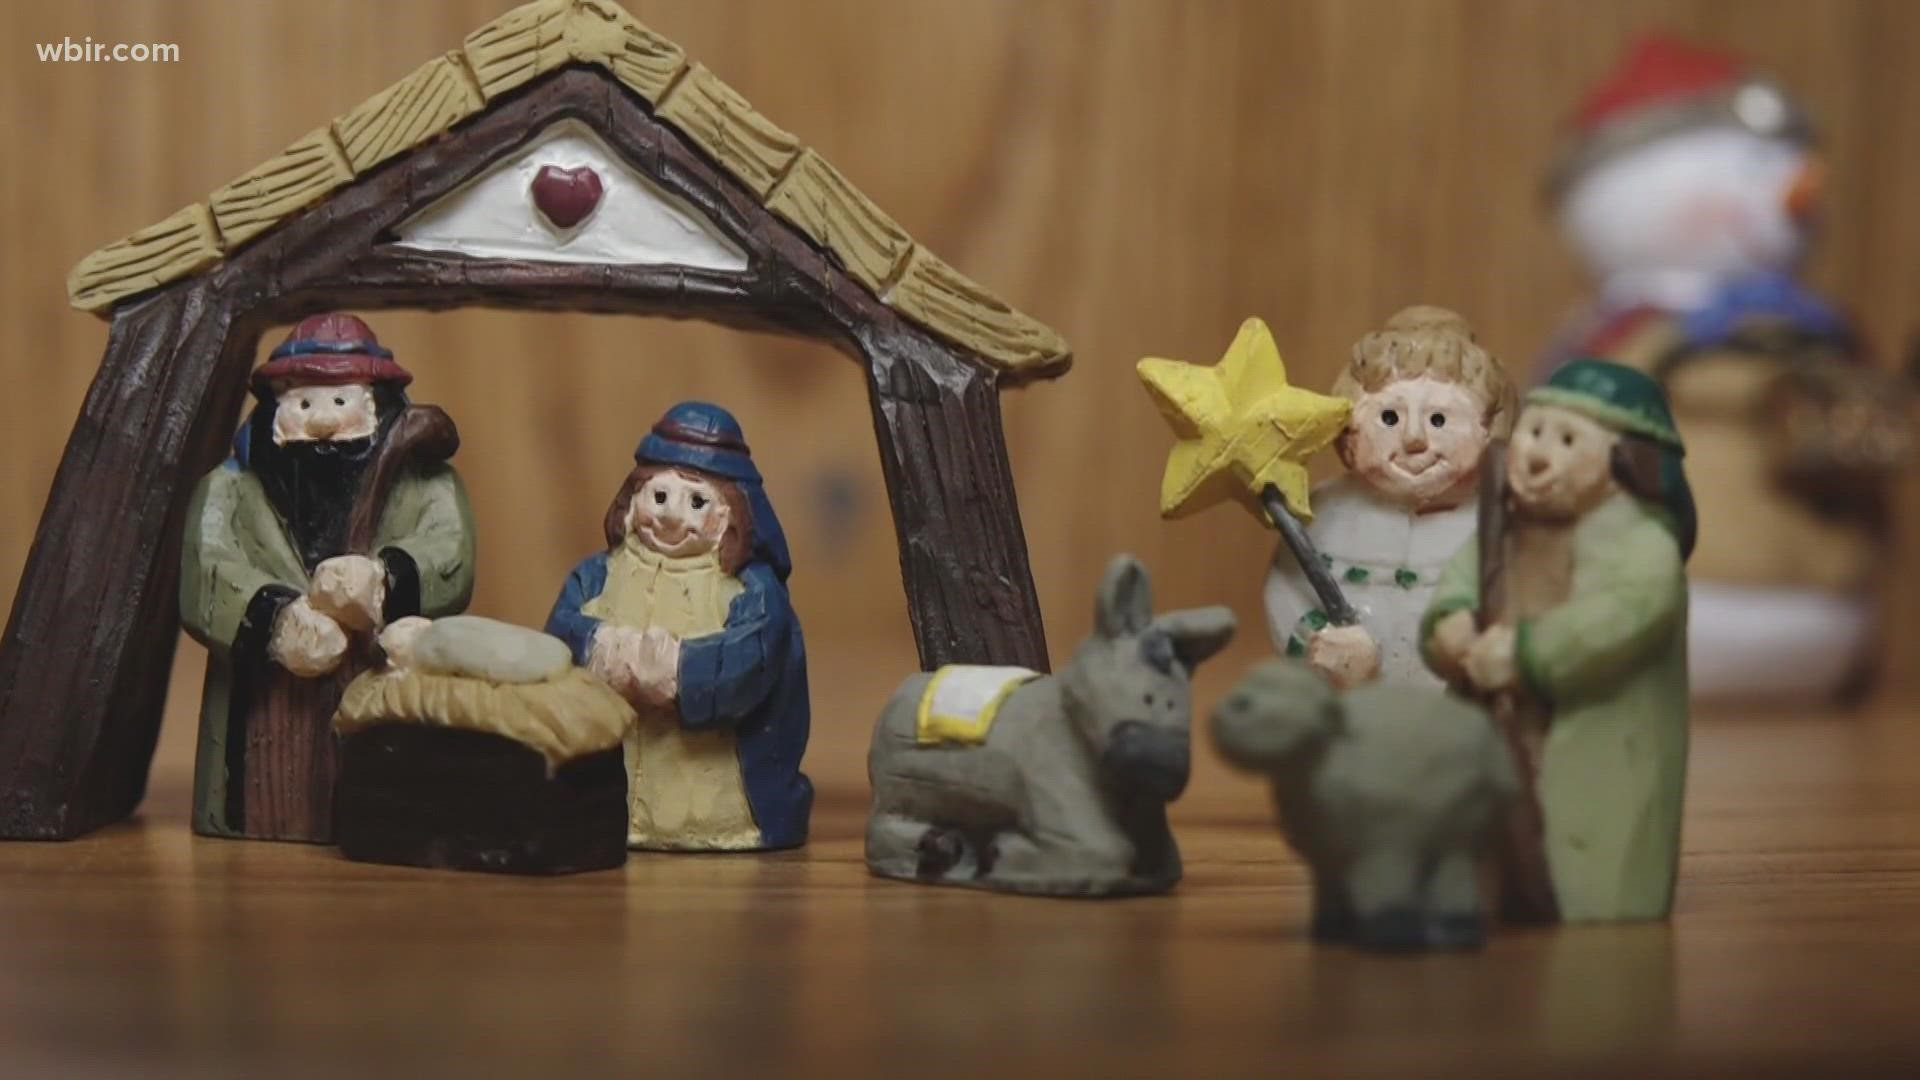 The couple said they have been building their Nativity collection since 1989.